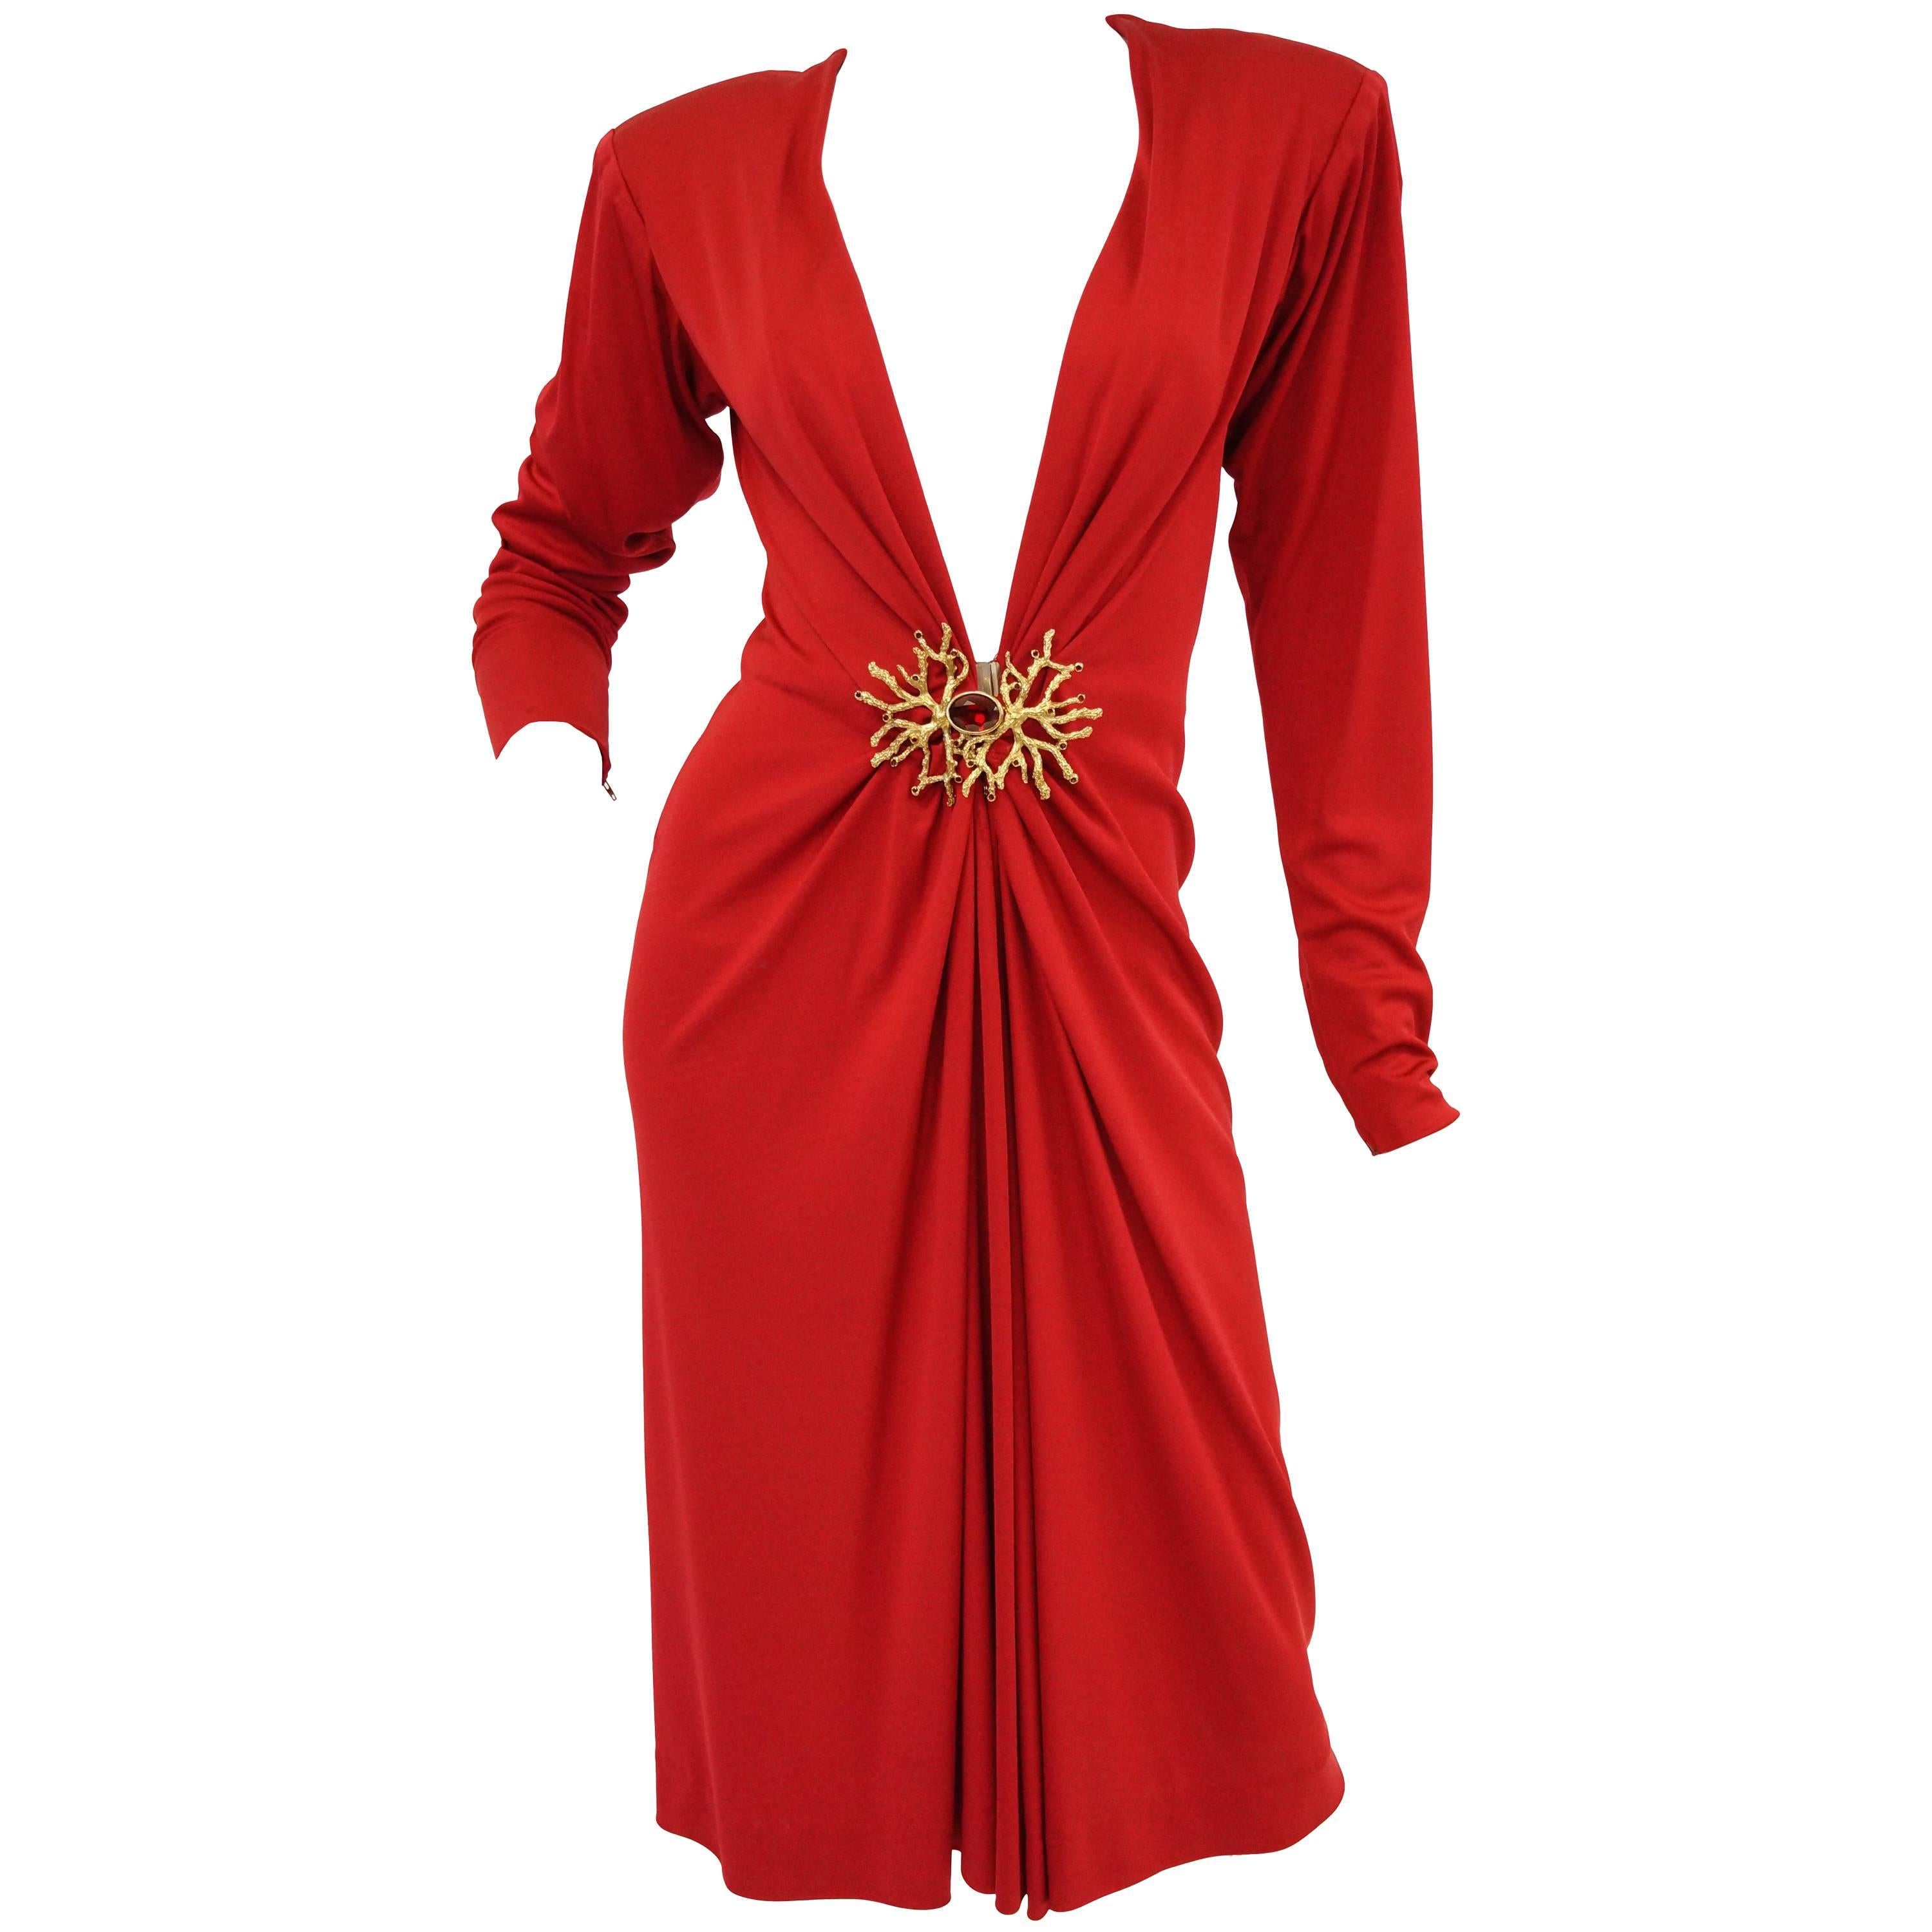 Yves Saint Laurent Silk Jersey Red Plunge Front Dress, 1980s